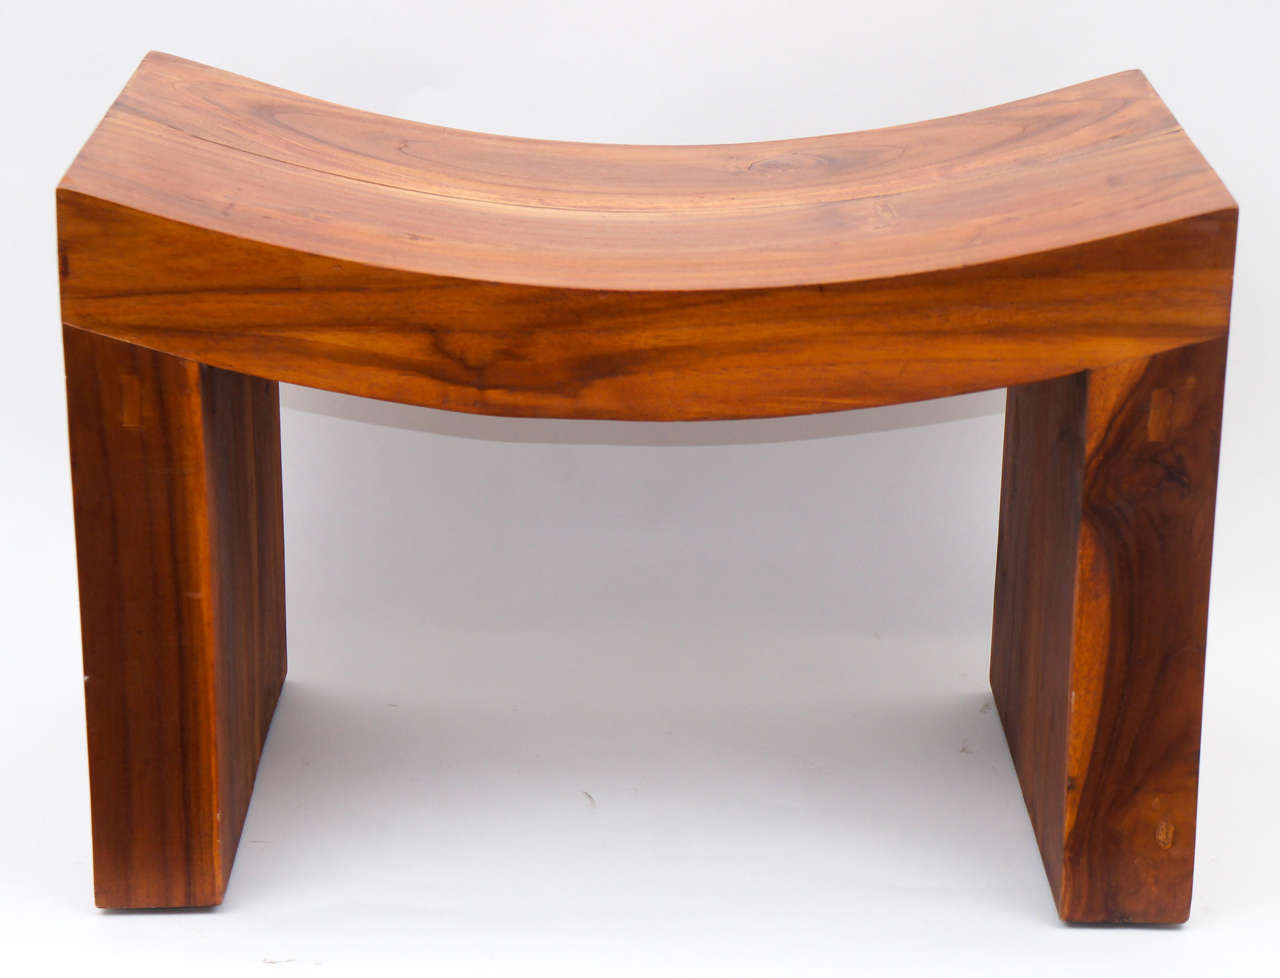 This Small Bench or Large Stool serves as a End Table as Well